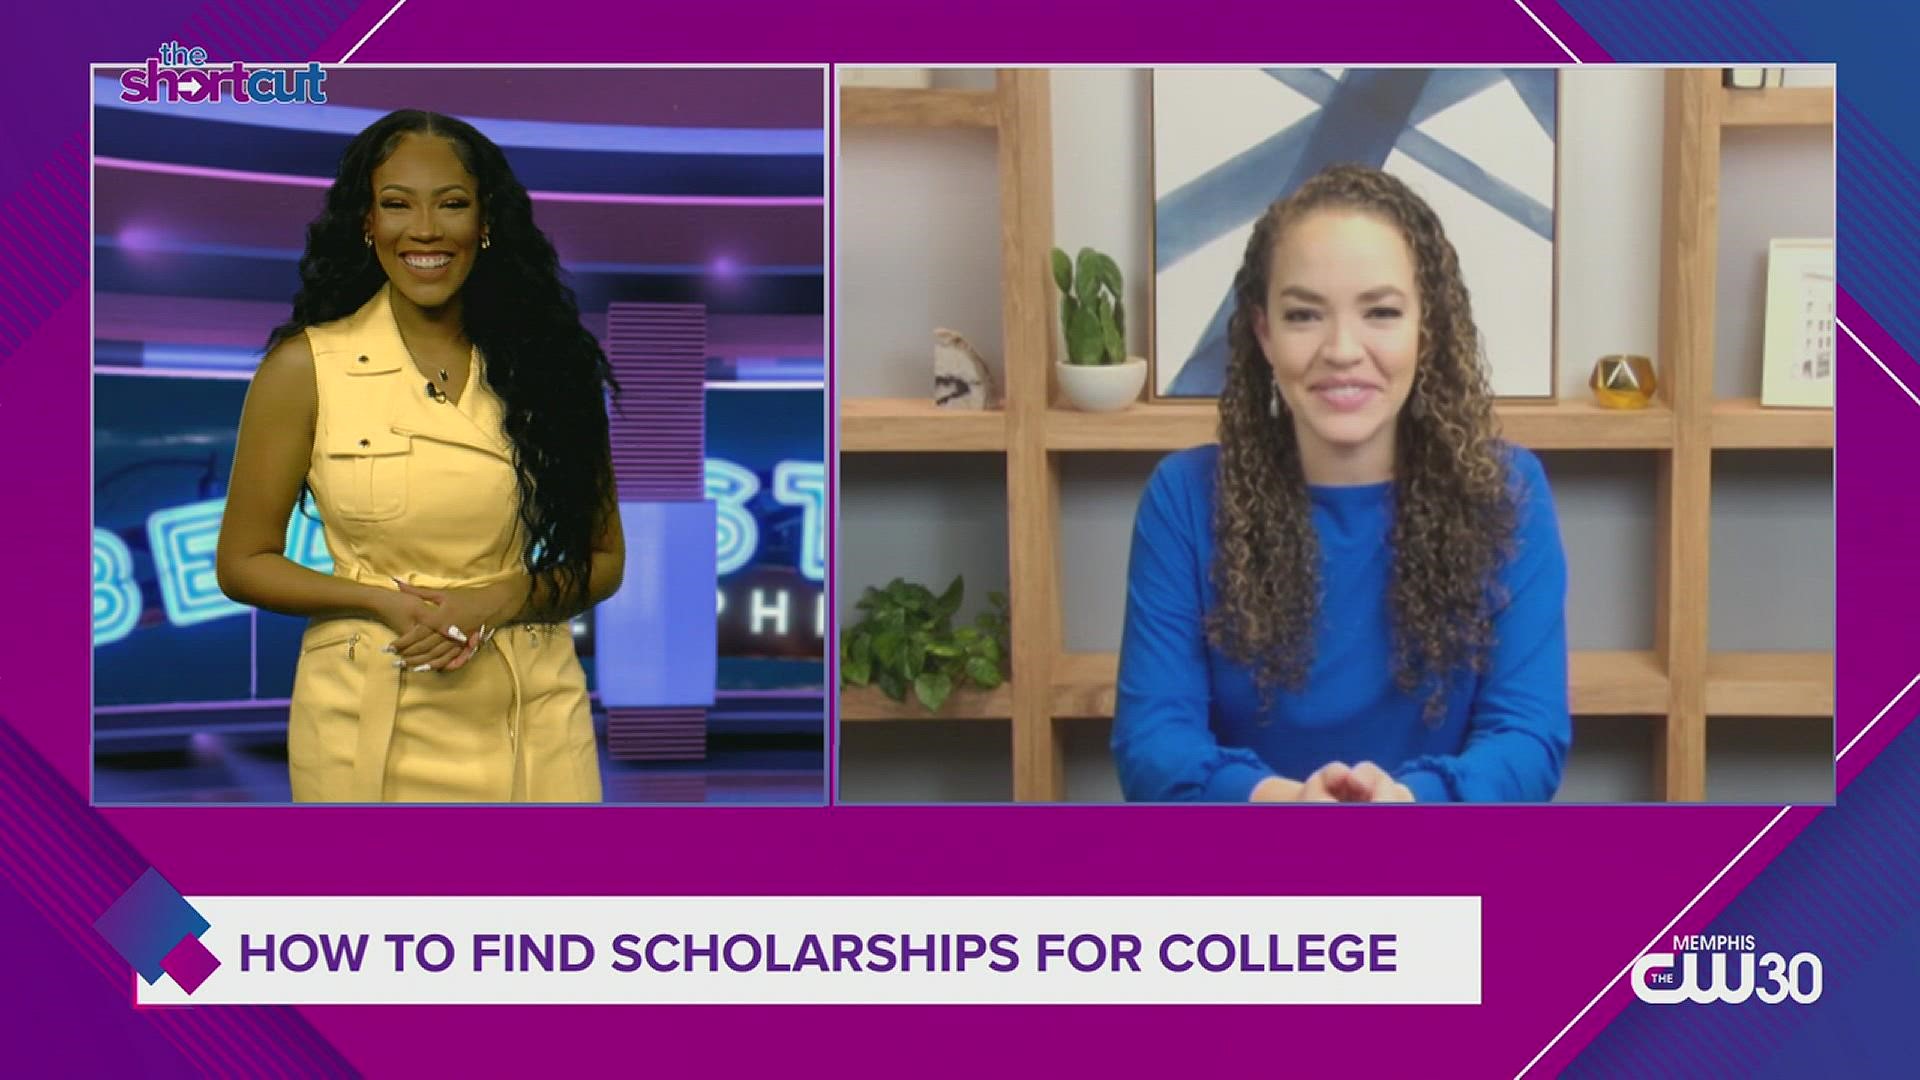 Looking for college scholarships? In that case, no longer further than scholarship winner and author, Kristina Ellis, for her tips on this week's "The Shortcut!"